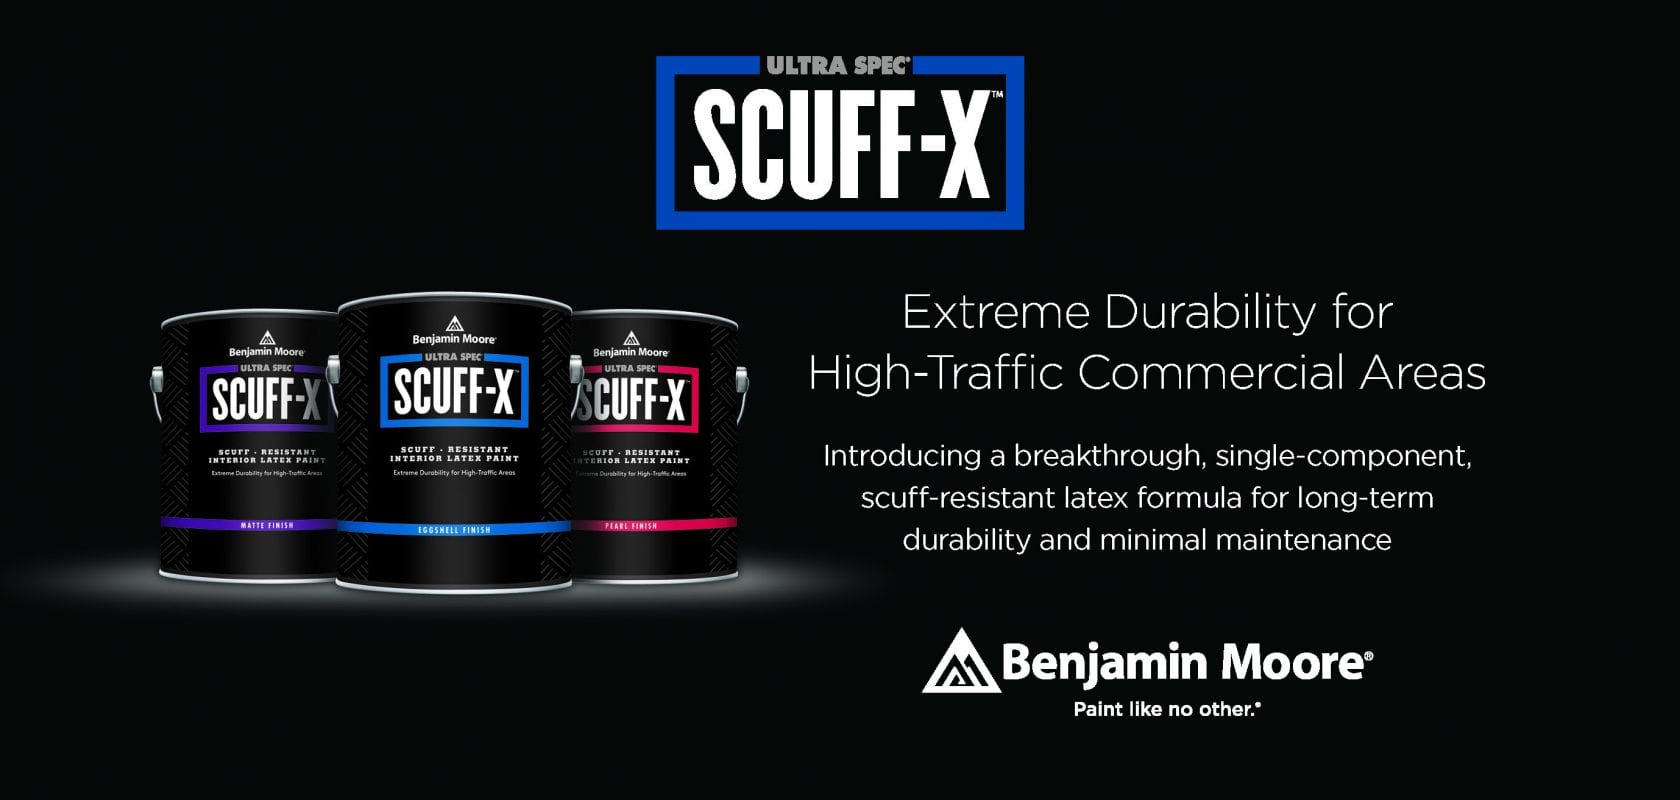 Introducing Scuff-X by Benjamin Moore